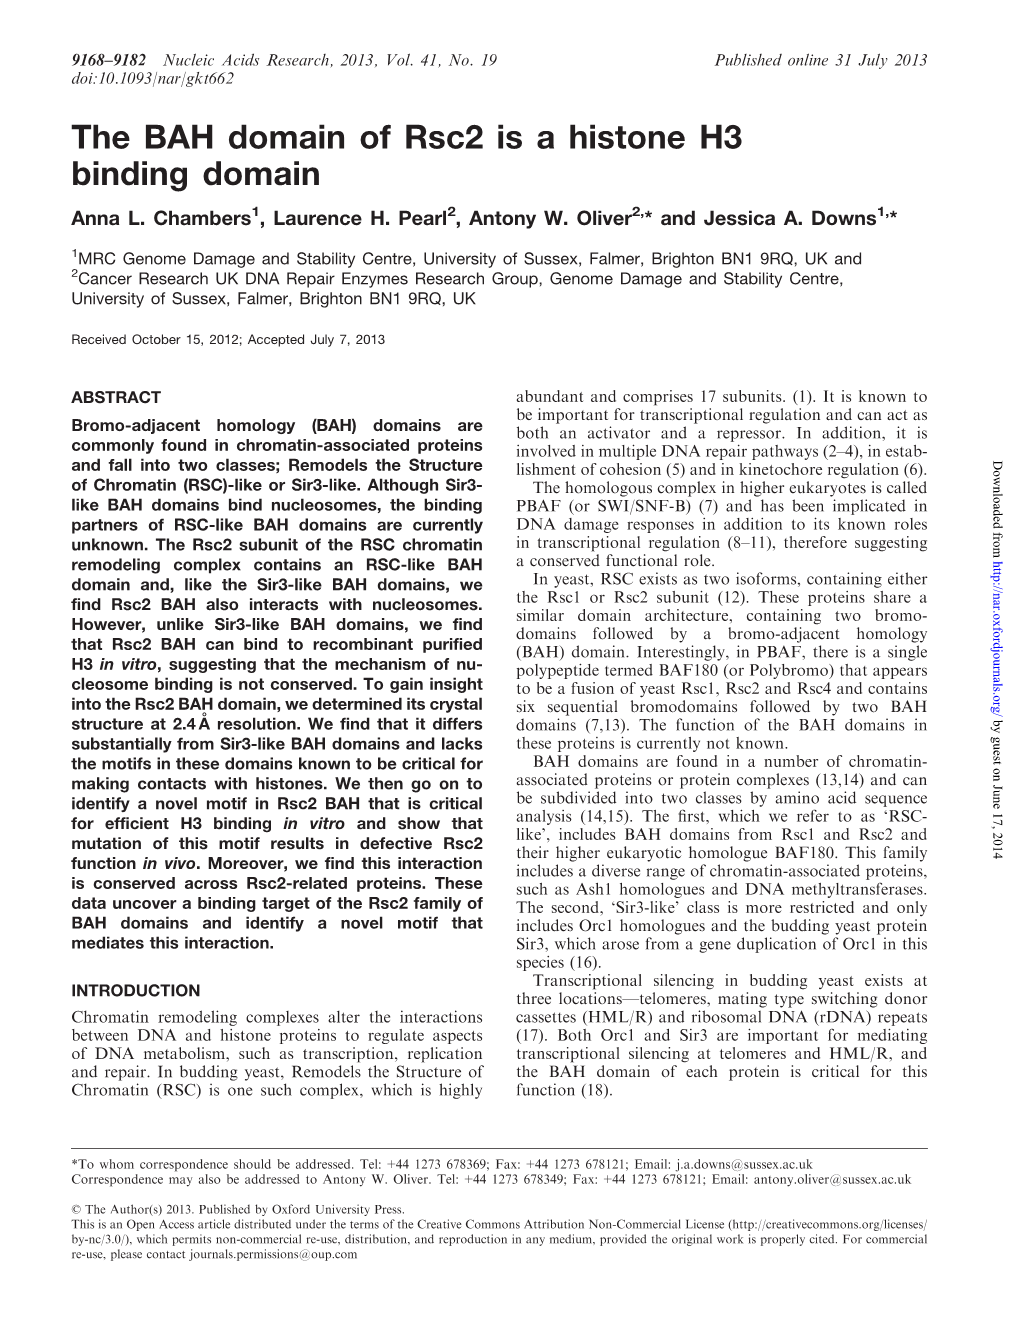 The BAH Domain of Rsc2 Is a Histone H3 Binding Domain Anna L